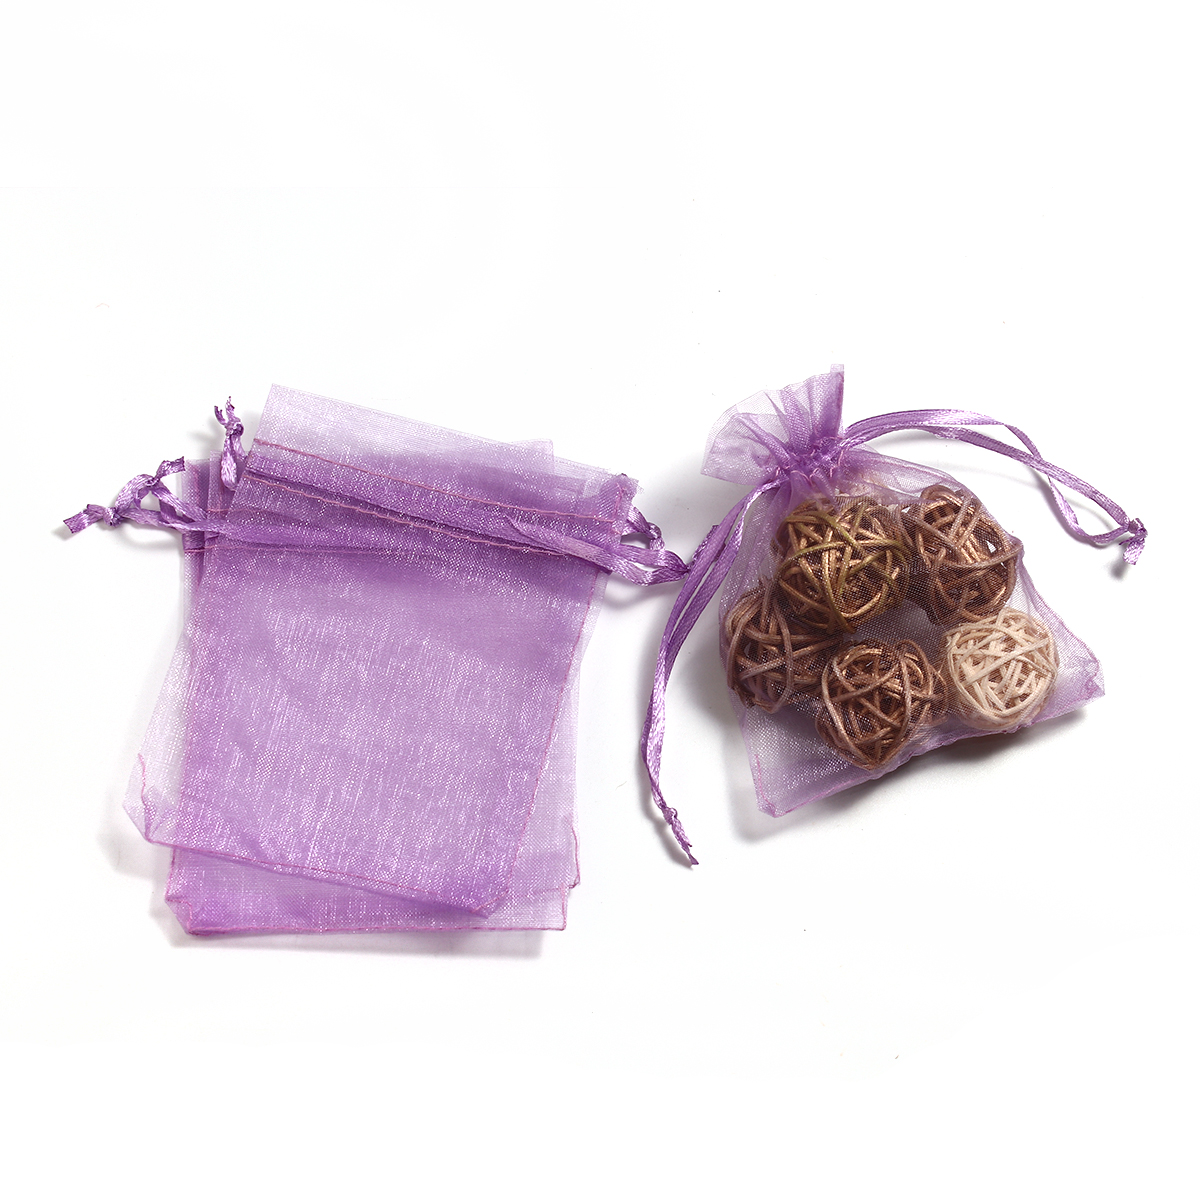 Picture of Wedding Gift Organza Jewelry Bags Drawstring Rectangle Mauve (Usable Space: 9.5x9cm) 12cm(4 6/8") x 9cm(3 4/8"), 50 PCs